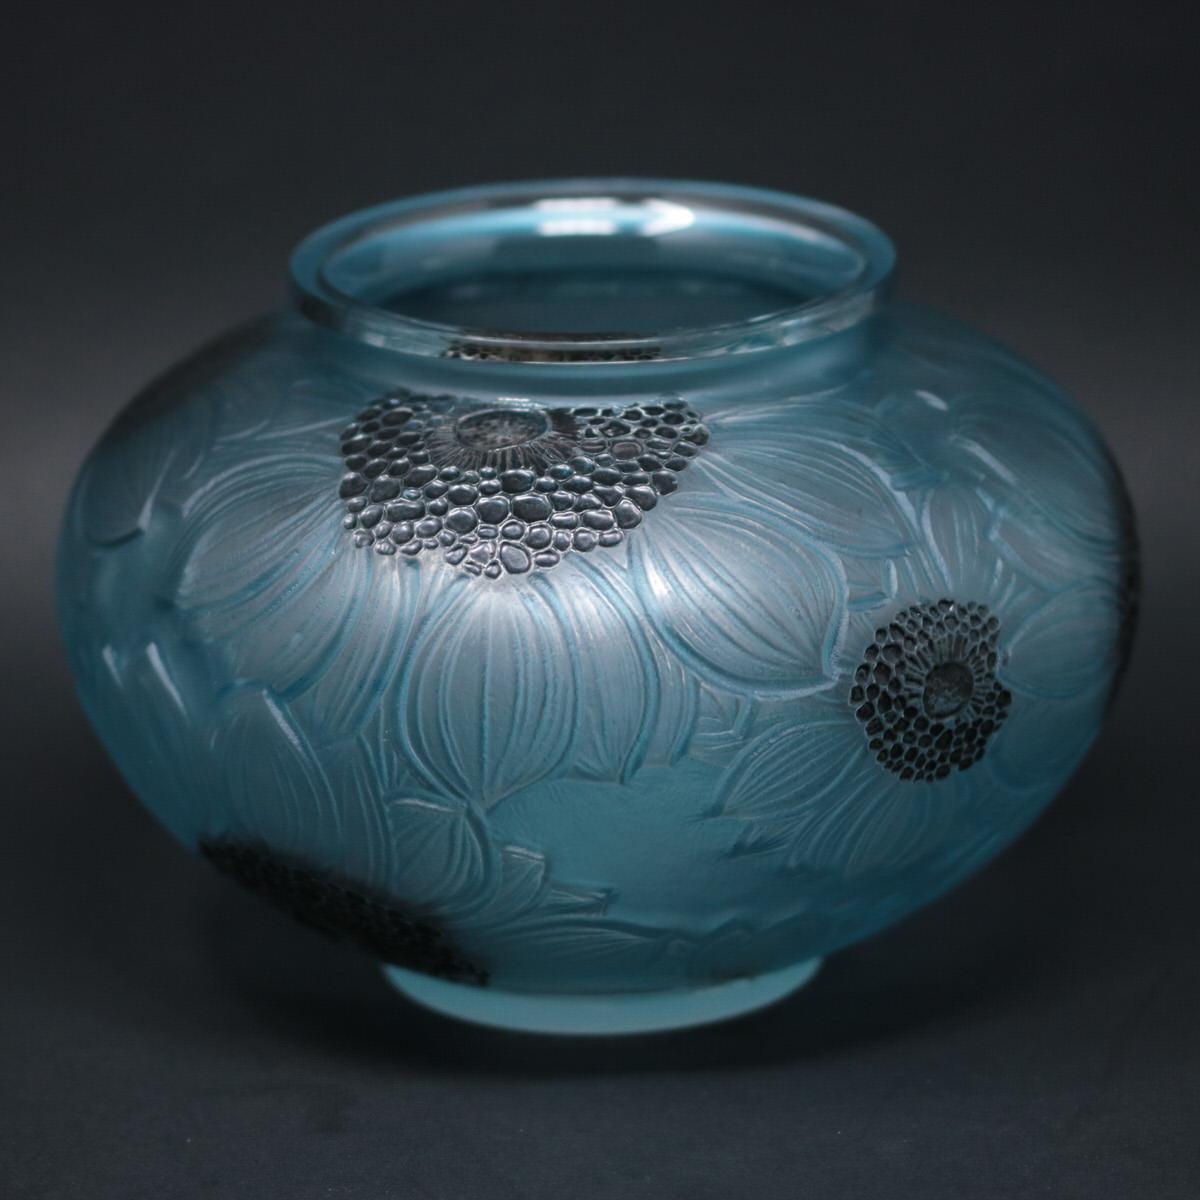 René Lalique clear and frosted glass 'Dahlia' vase. This pattern features overlapping Dahlia flowers, molded around the outside. Black enameled stamens and green/blue stained leaves. Moulded makers mark, 'R LALIQUE'. Book reference: Marcilhac 938.